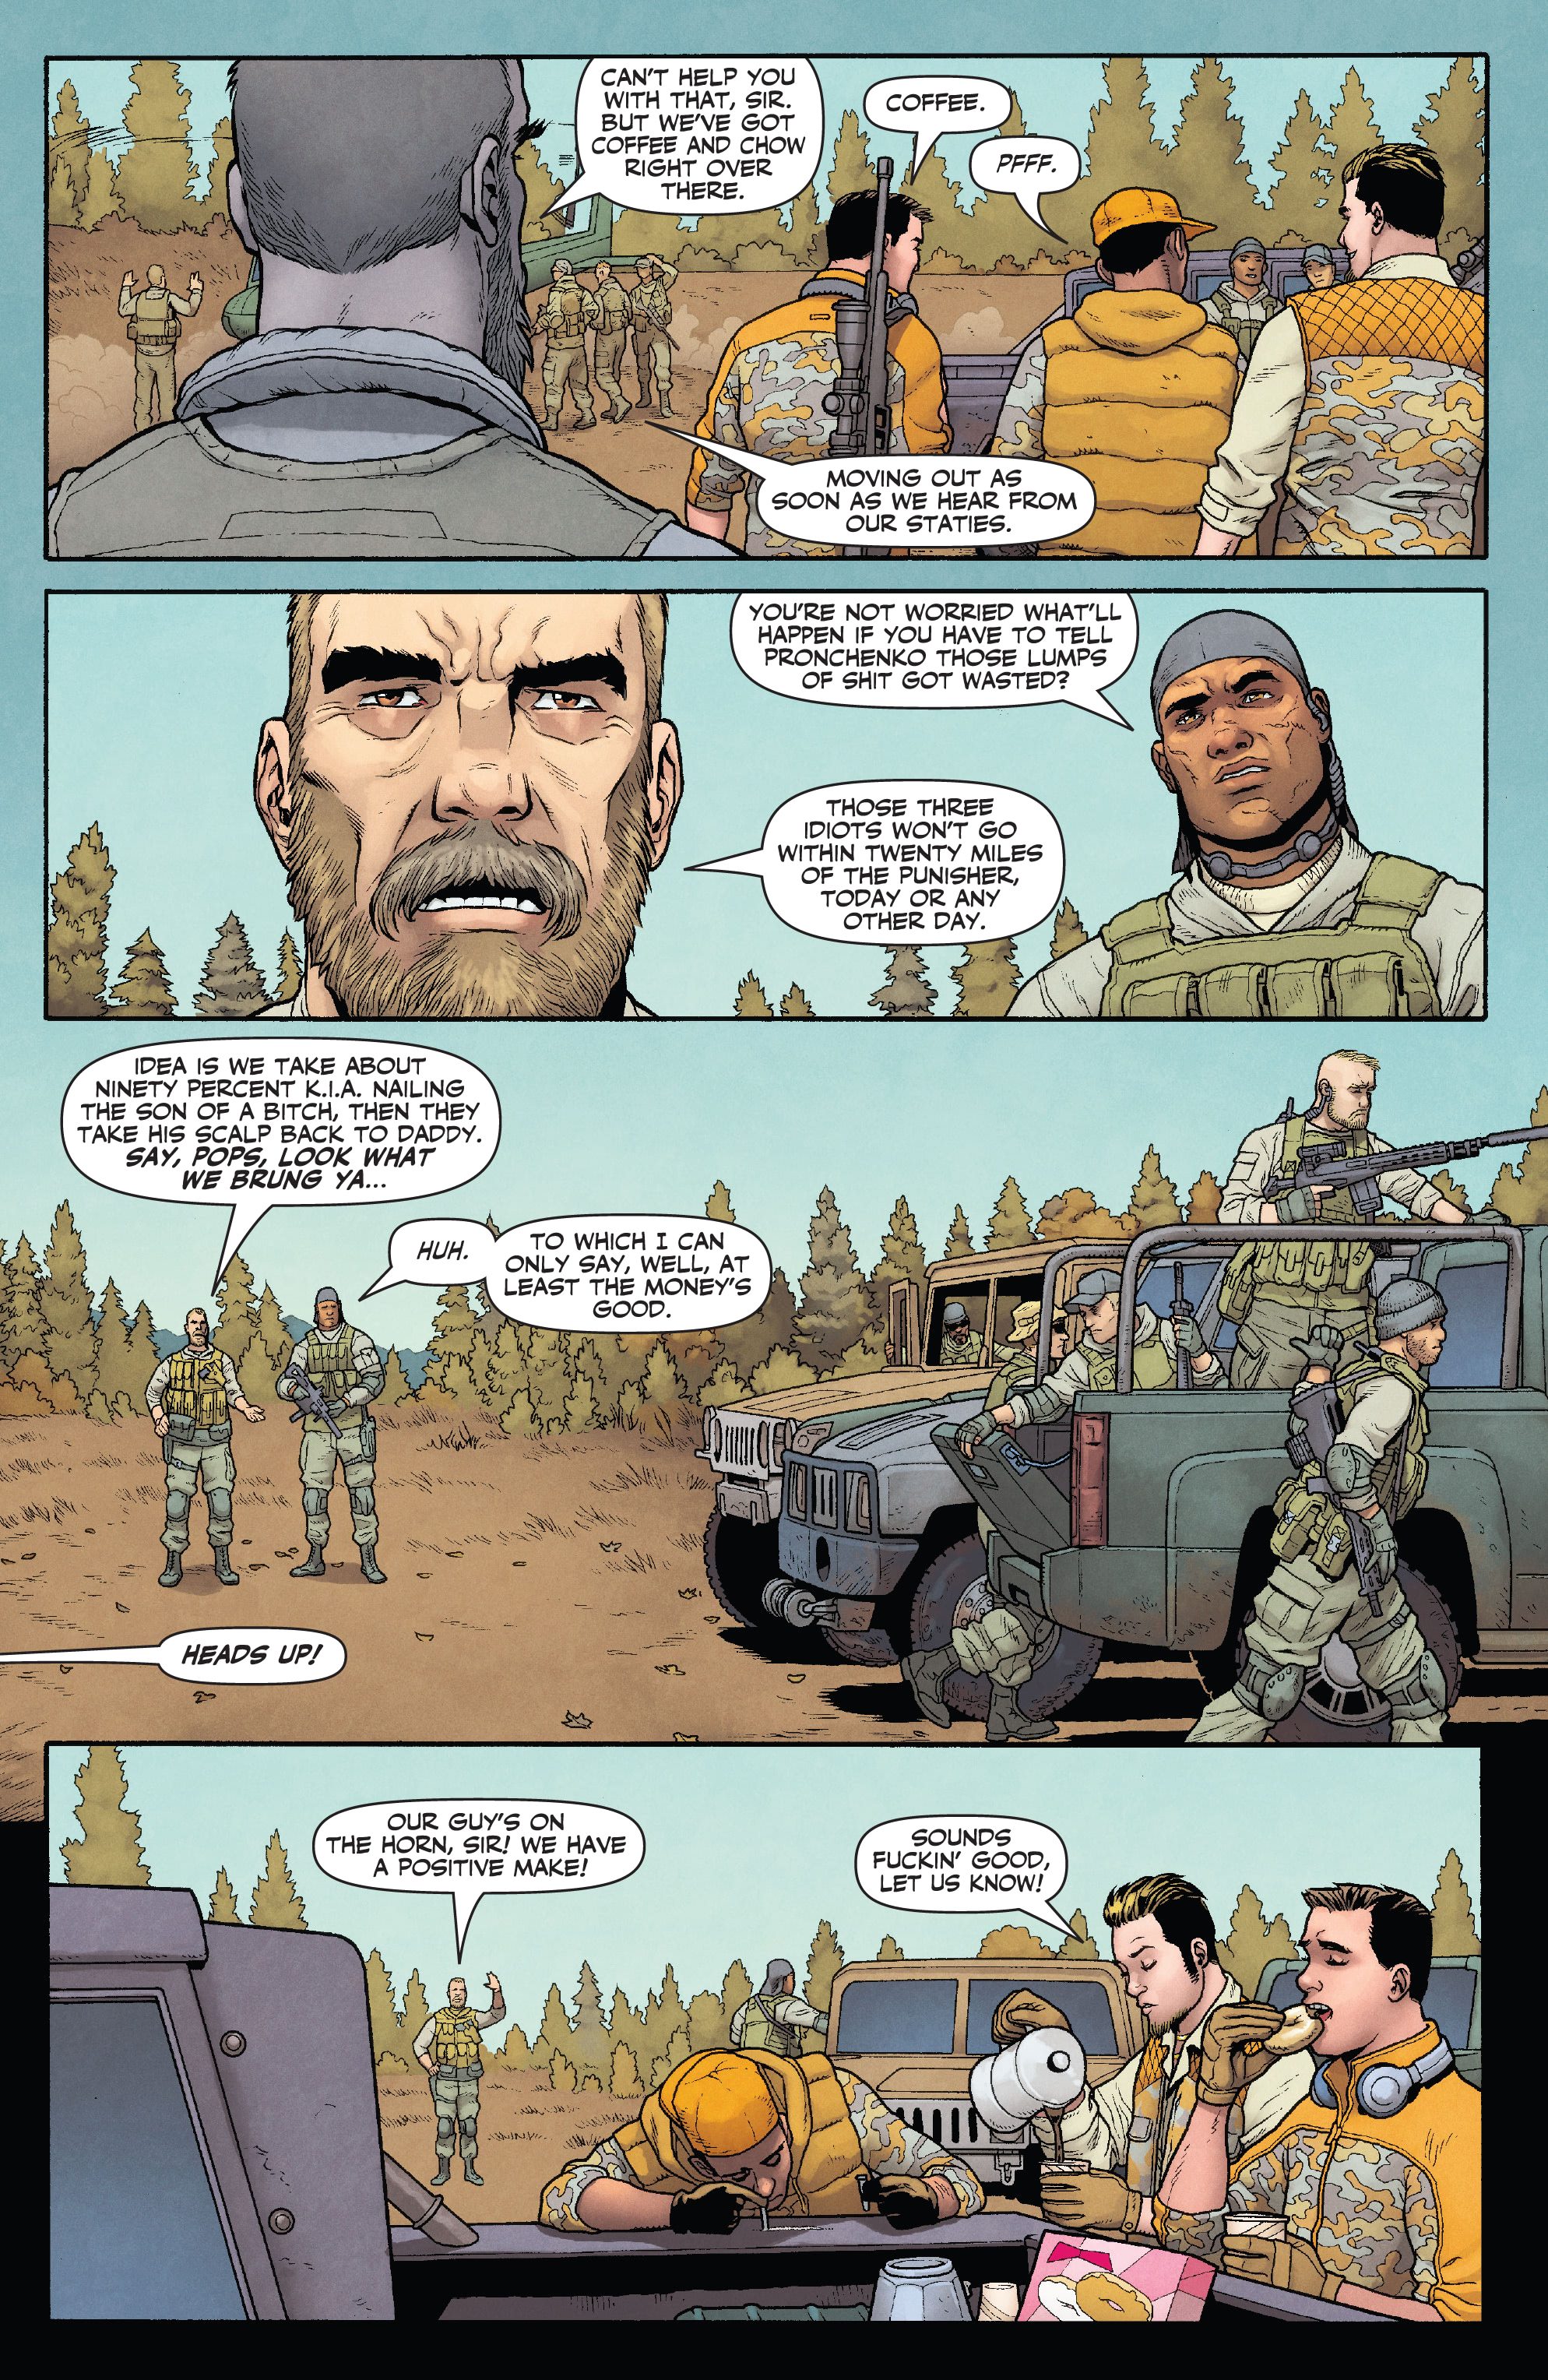 Punisher: Soviet (2019-): Chapter 5 - Page 7